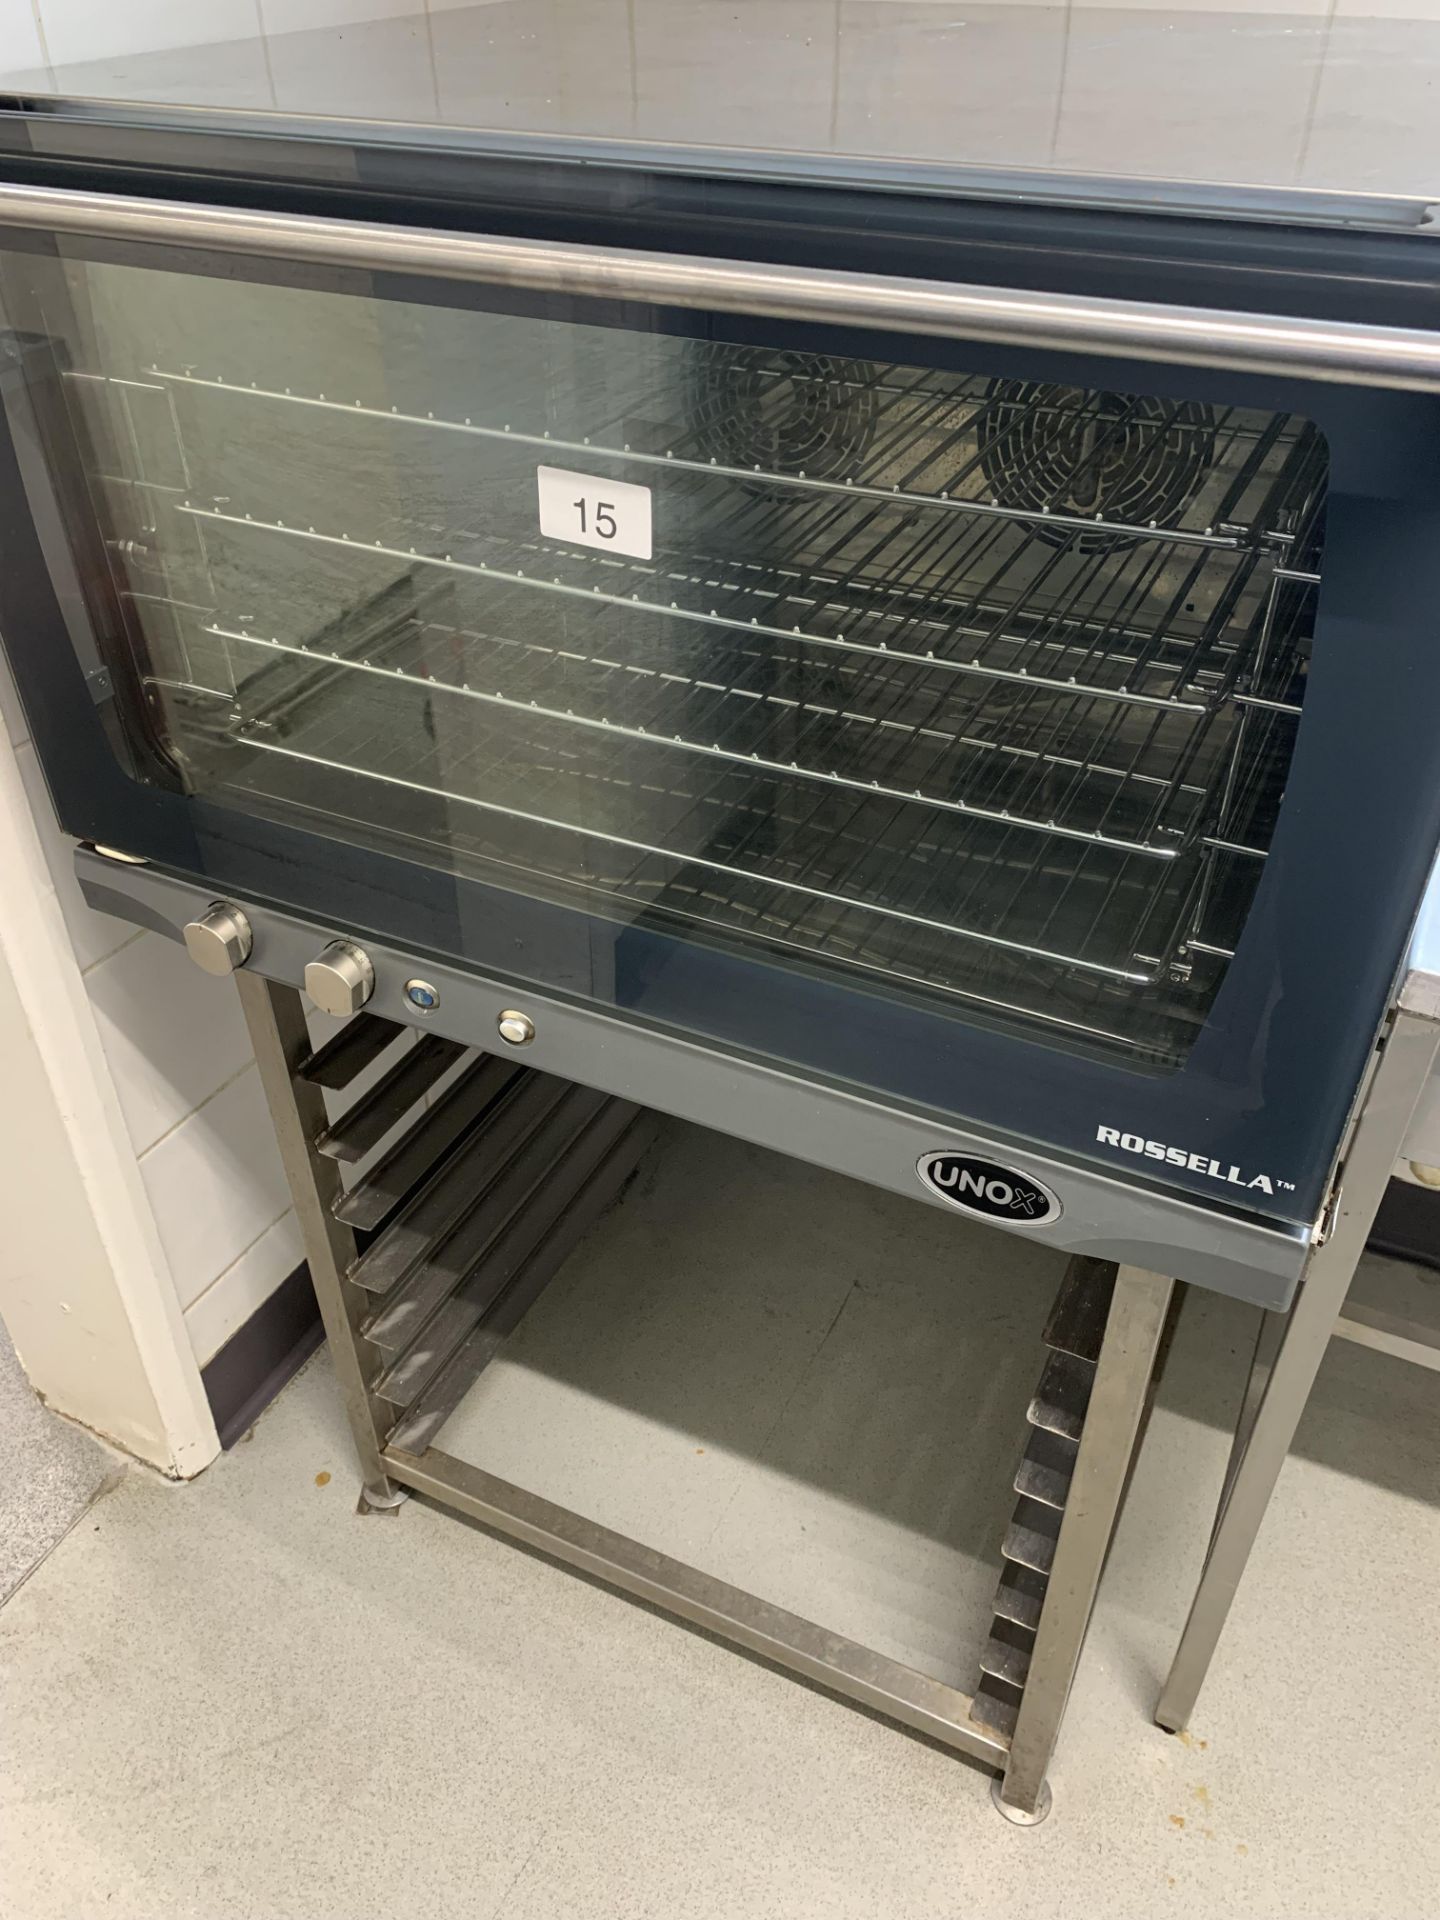 UNOX model XFT193 Rossella Convection Oven on stand